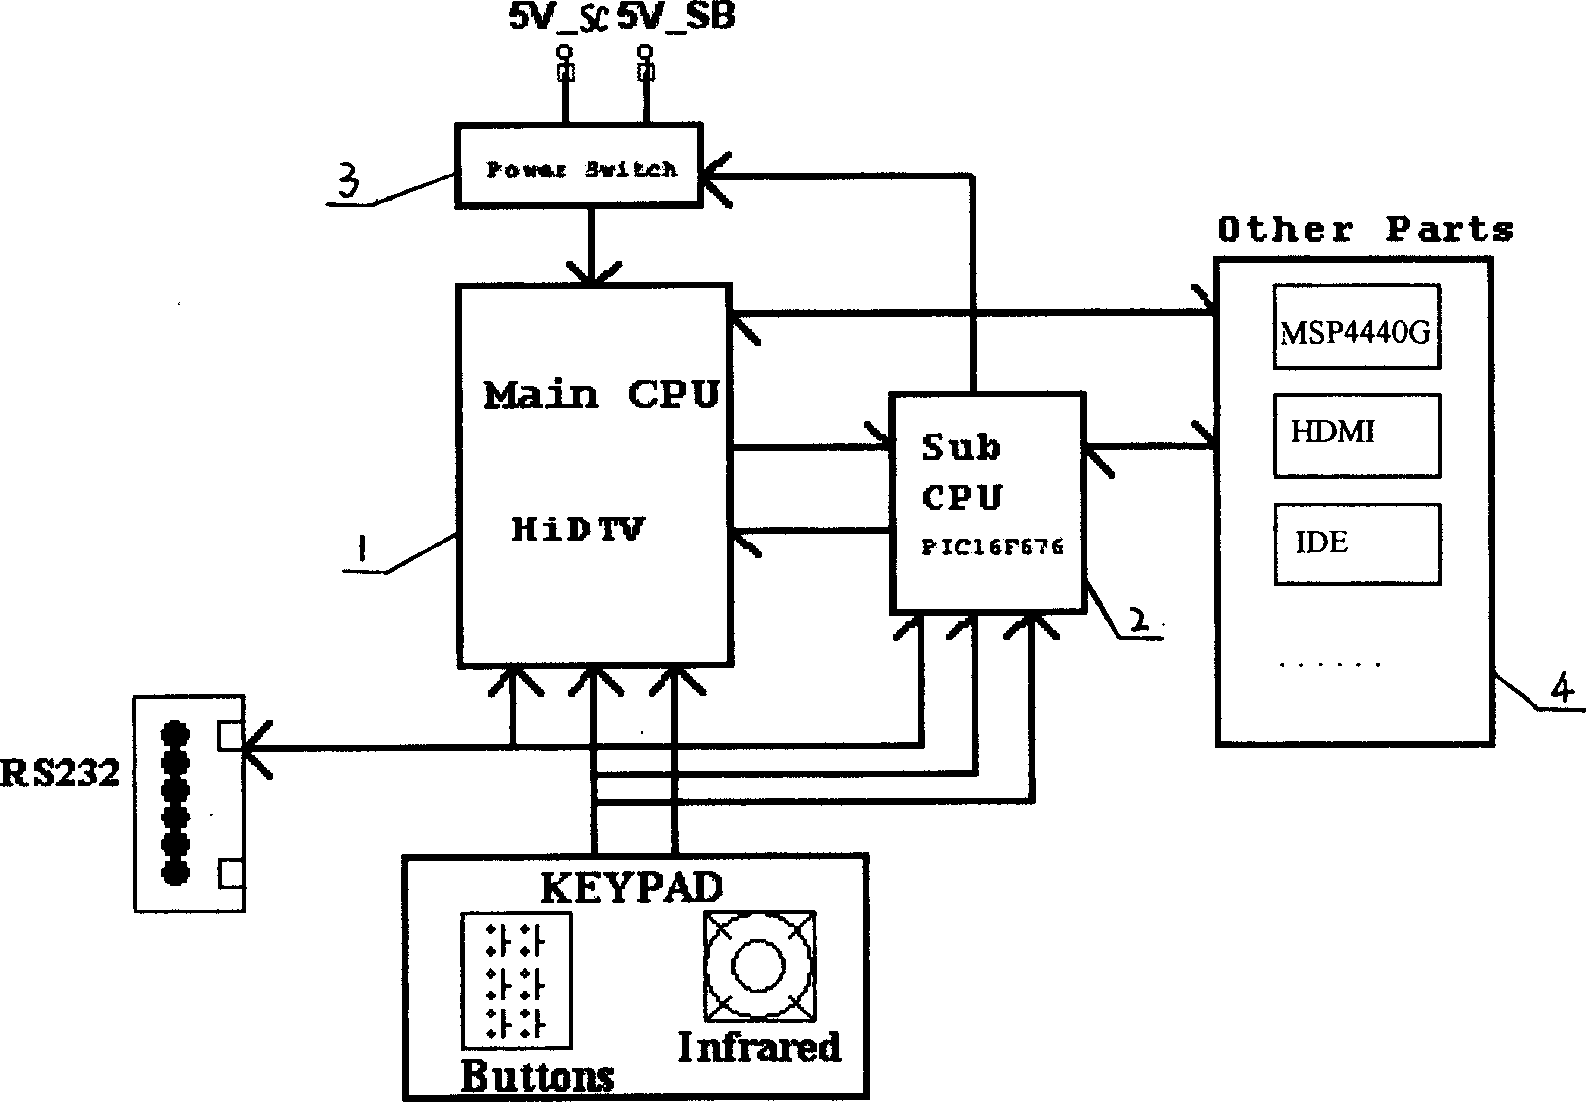 Quick starting TV set capable of implementing low power dissipation in stand by